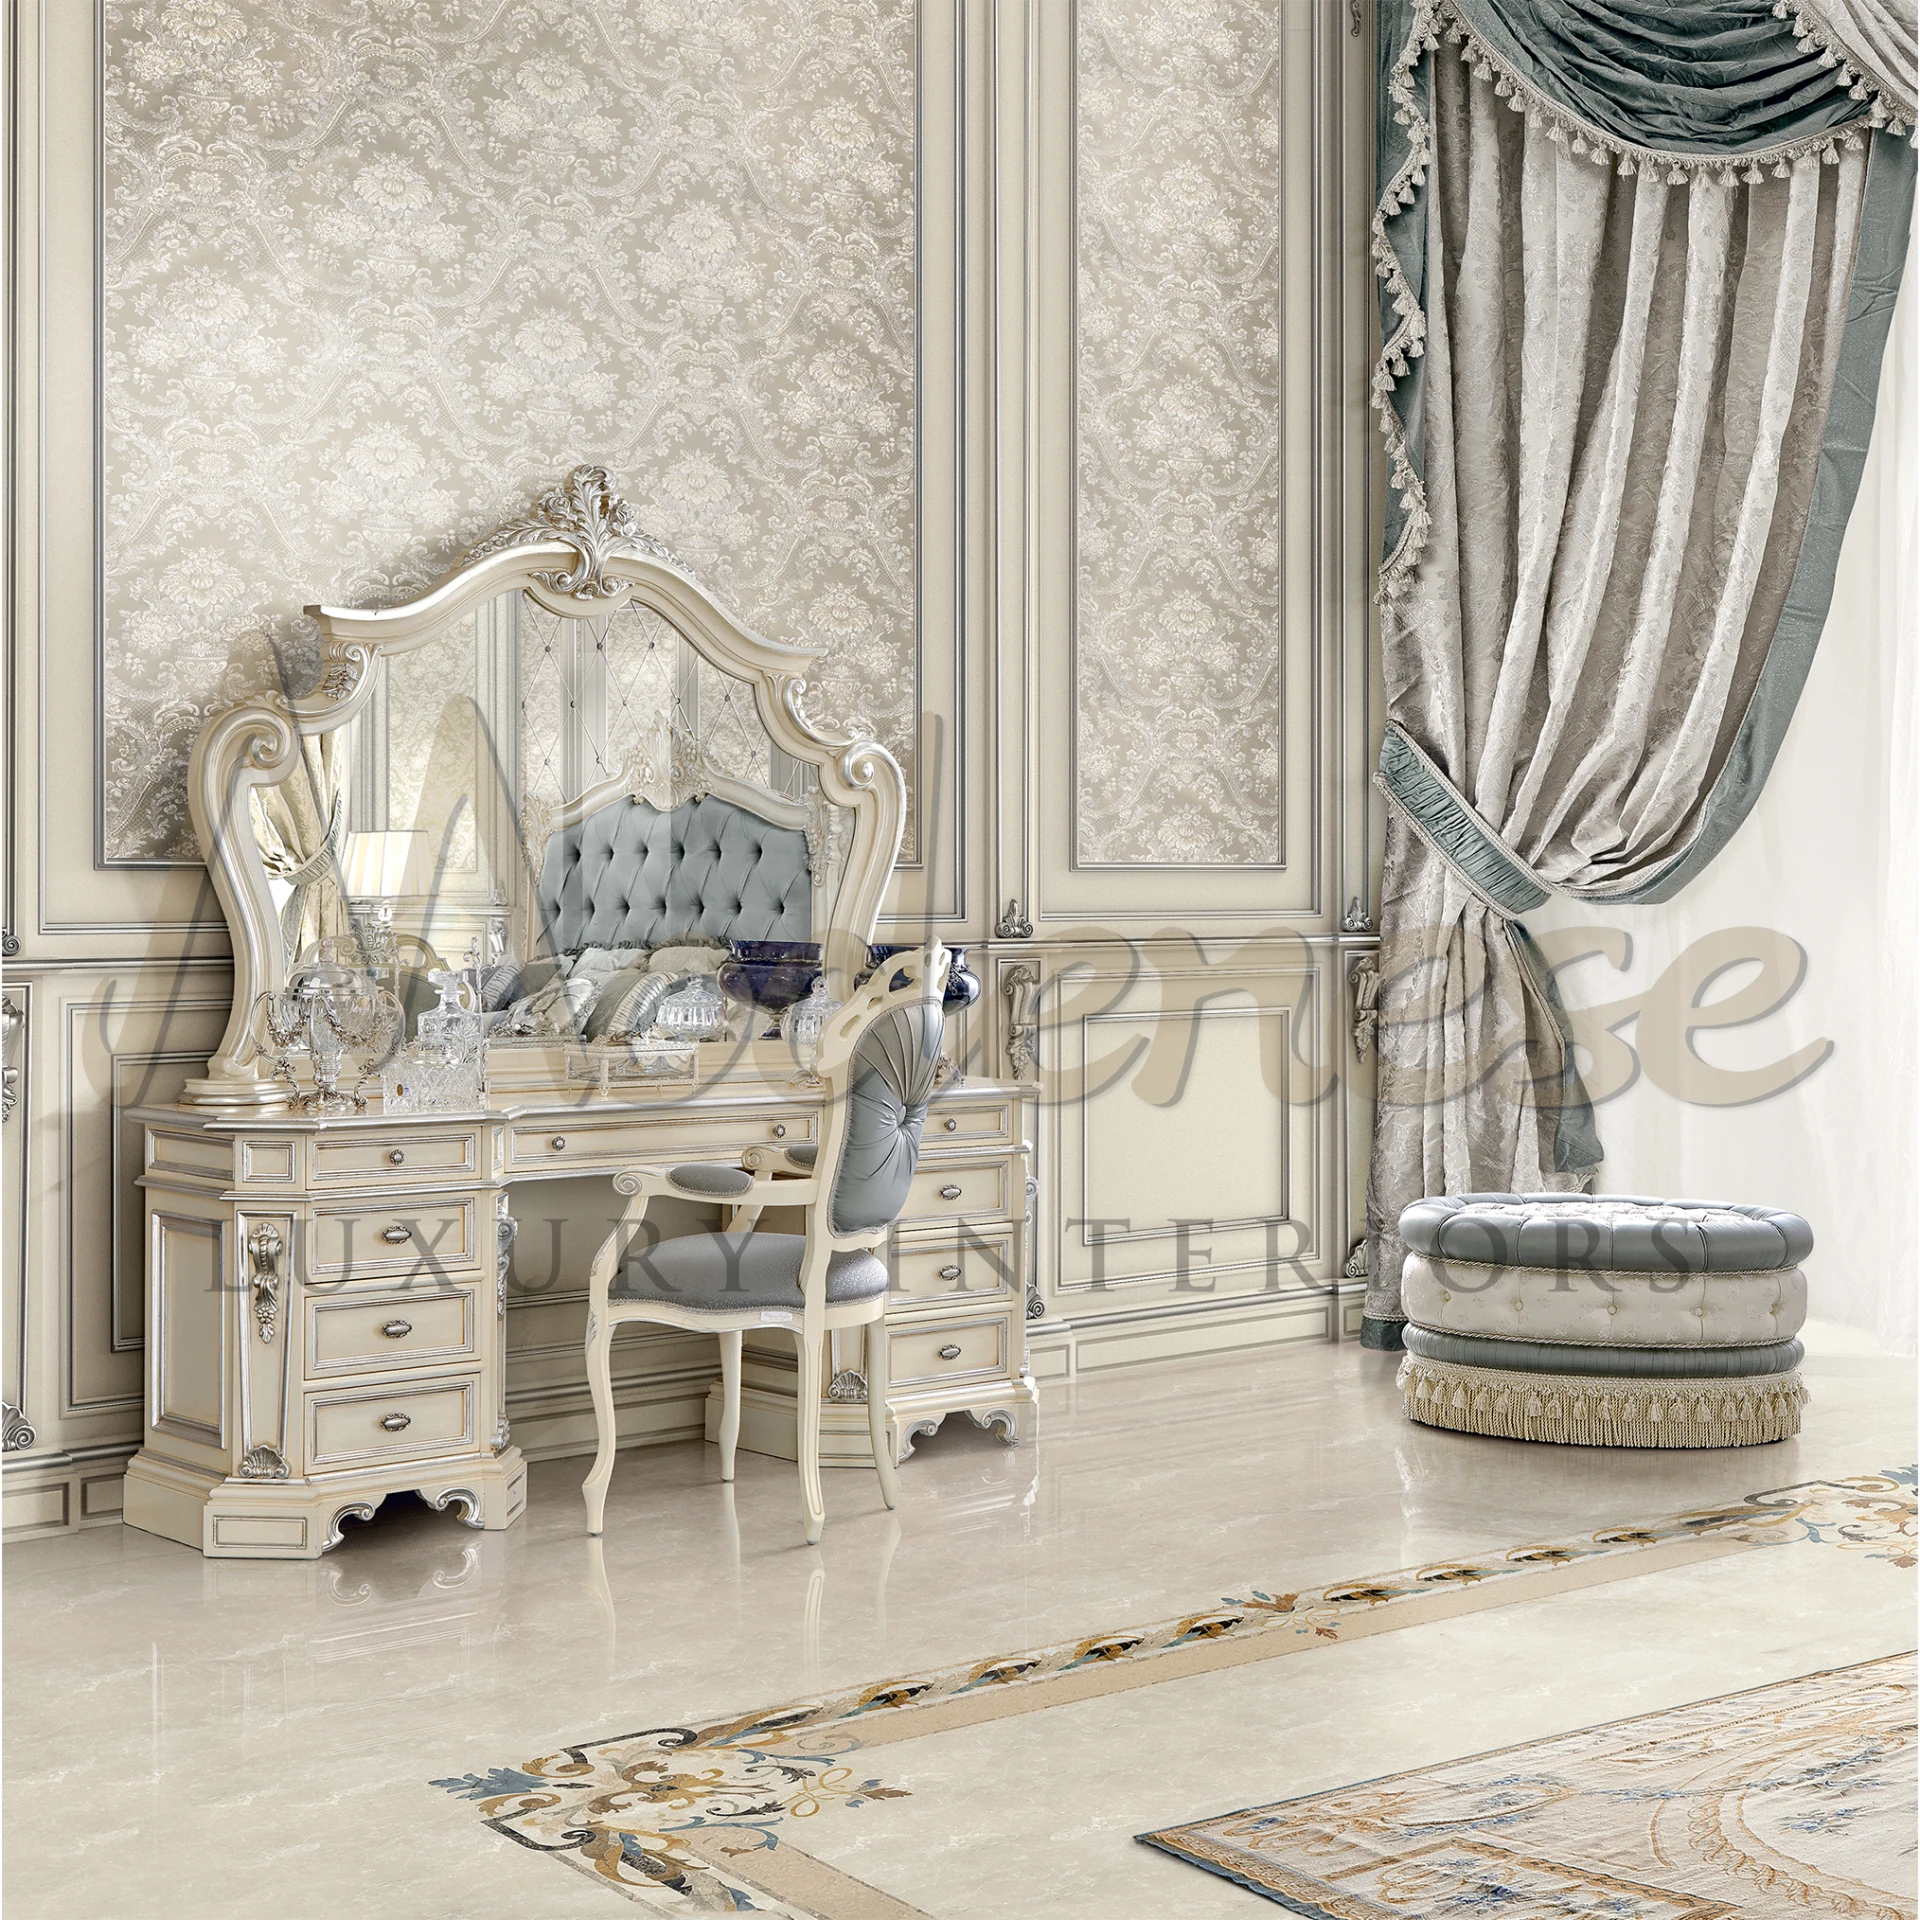 Elegant white mirror with unique figures, perfect for adding a clean, sophisticated touch to any room.